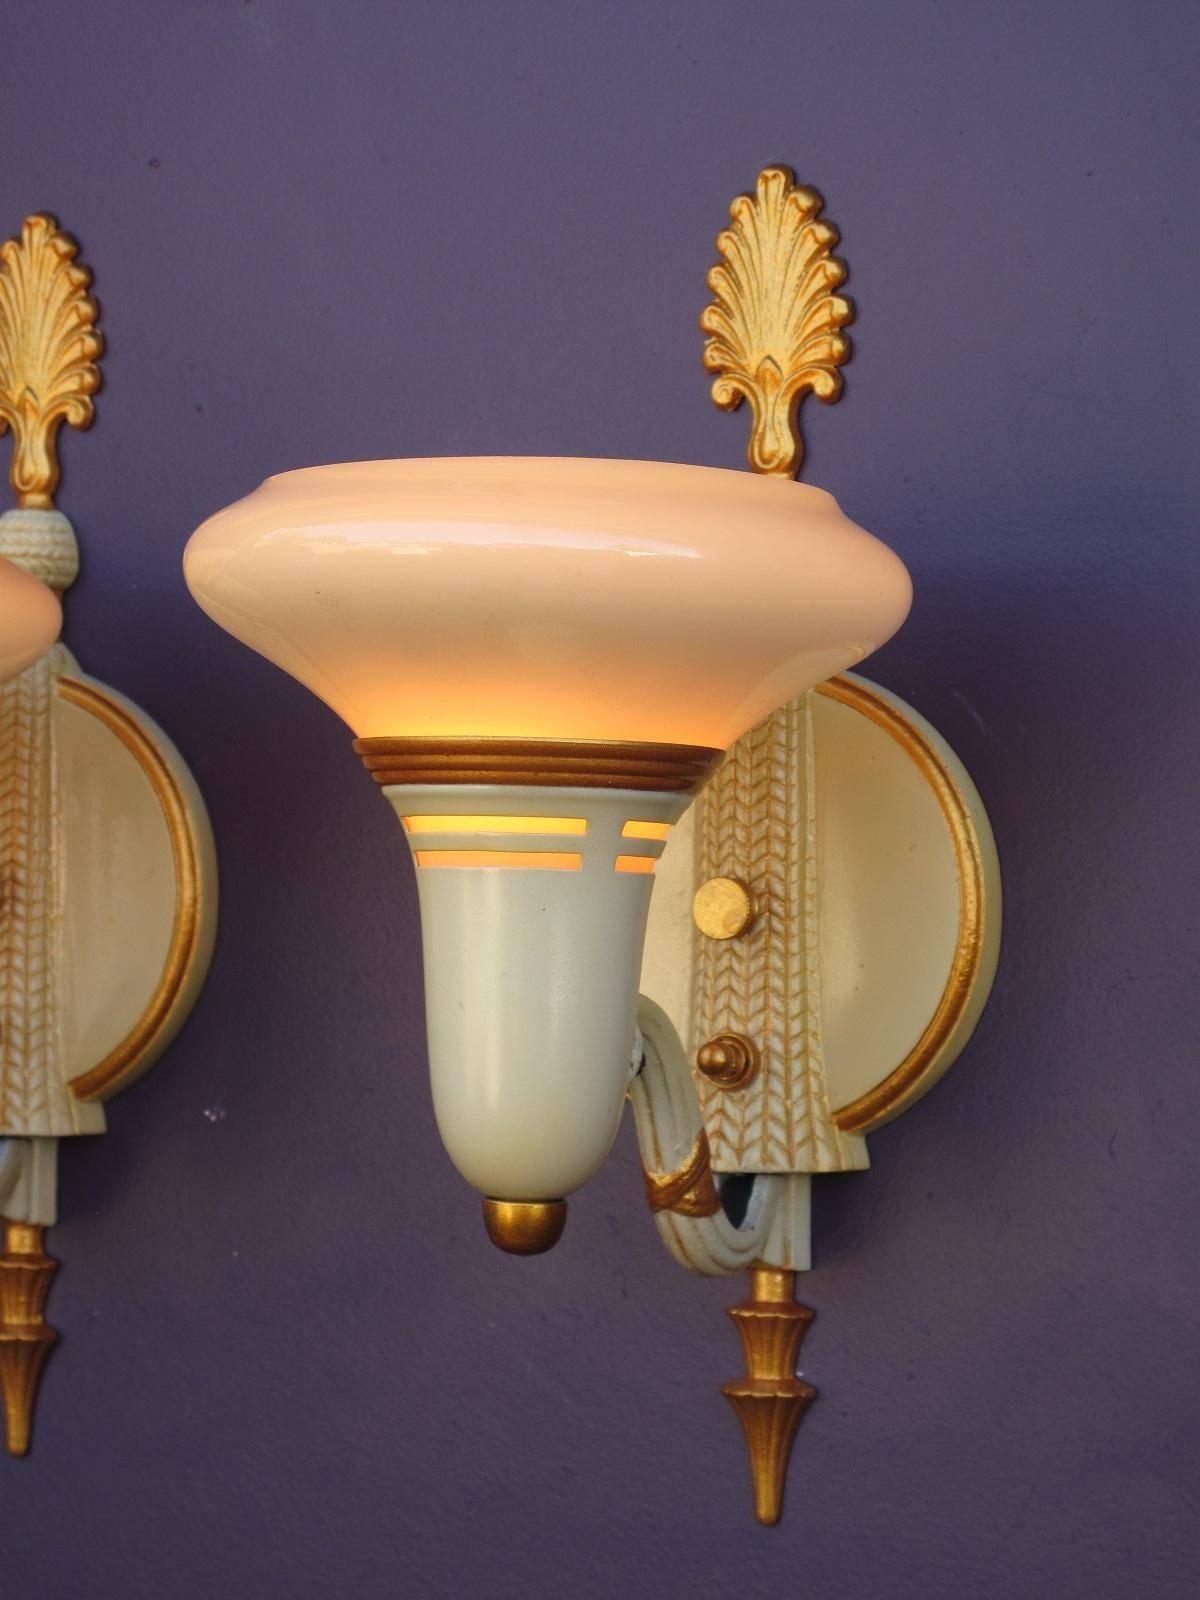 Somewhat Deco somewhat Federal wholly delightful. A very nice marriage of styles from the 1930s or late 1920s. Restored pair vintage slip shade wall sconce light fixture with custard bowl shades. Restored, repainted, rewired, enjoy. Measures: Height